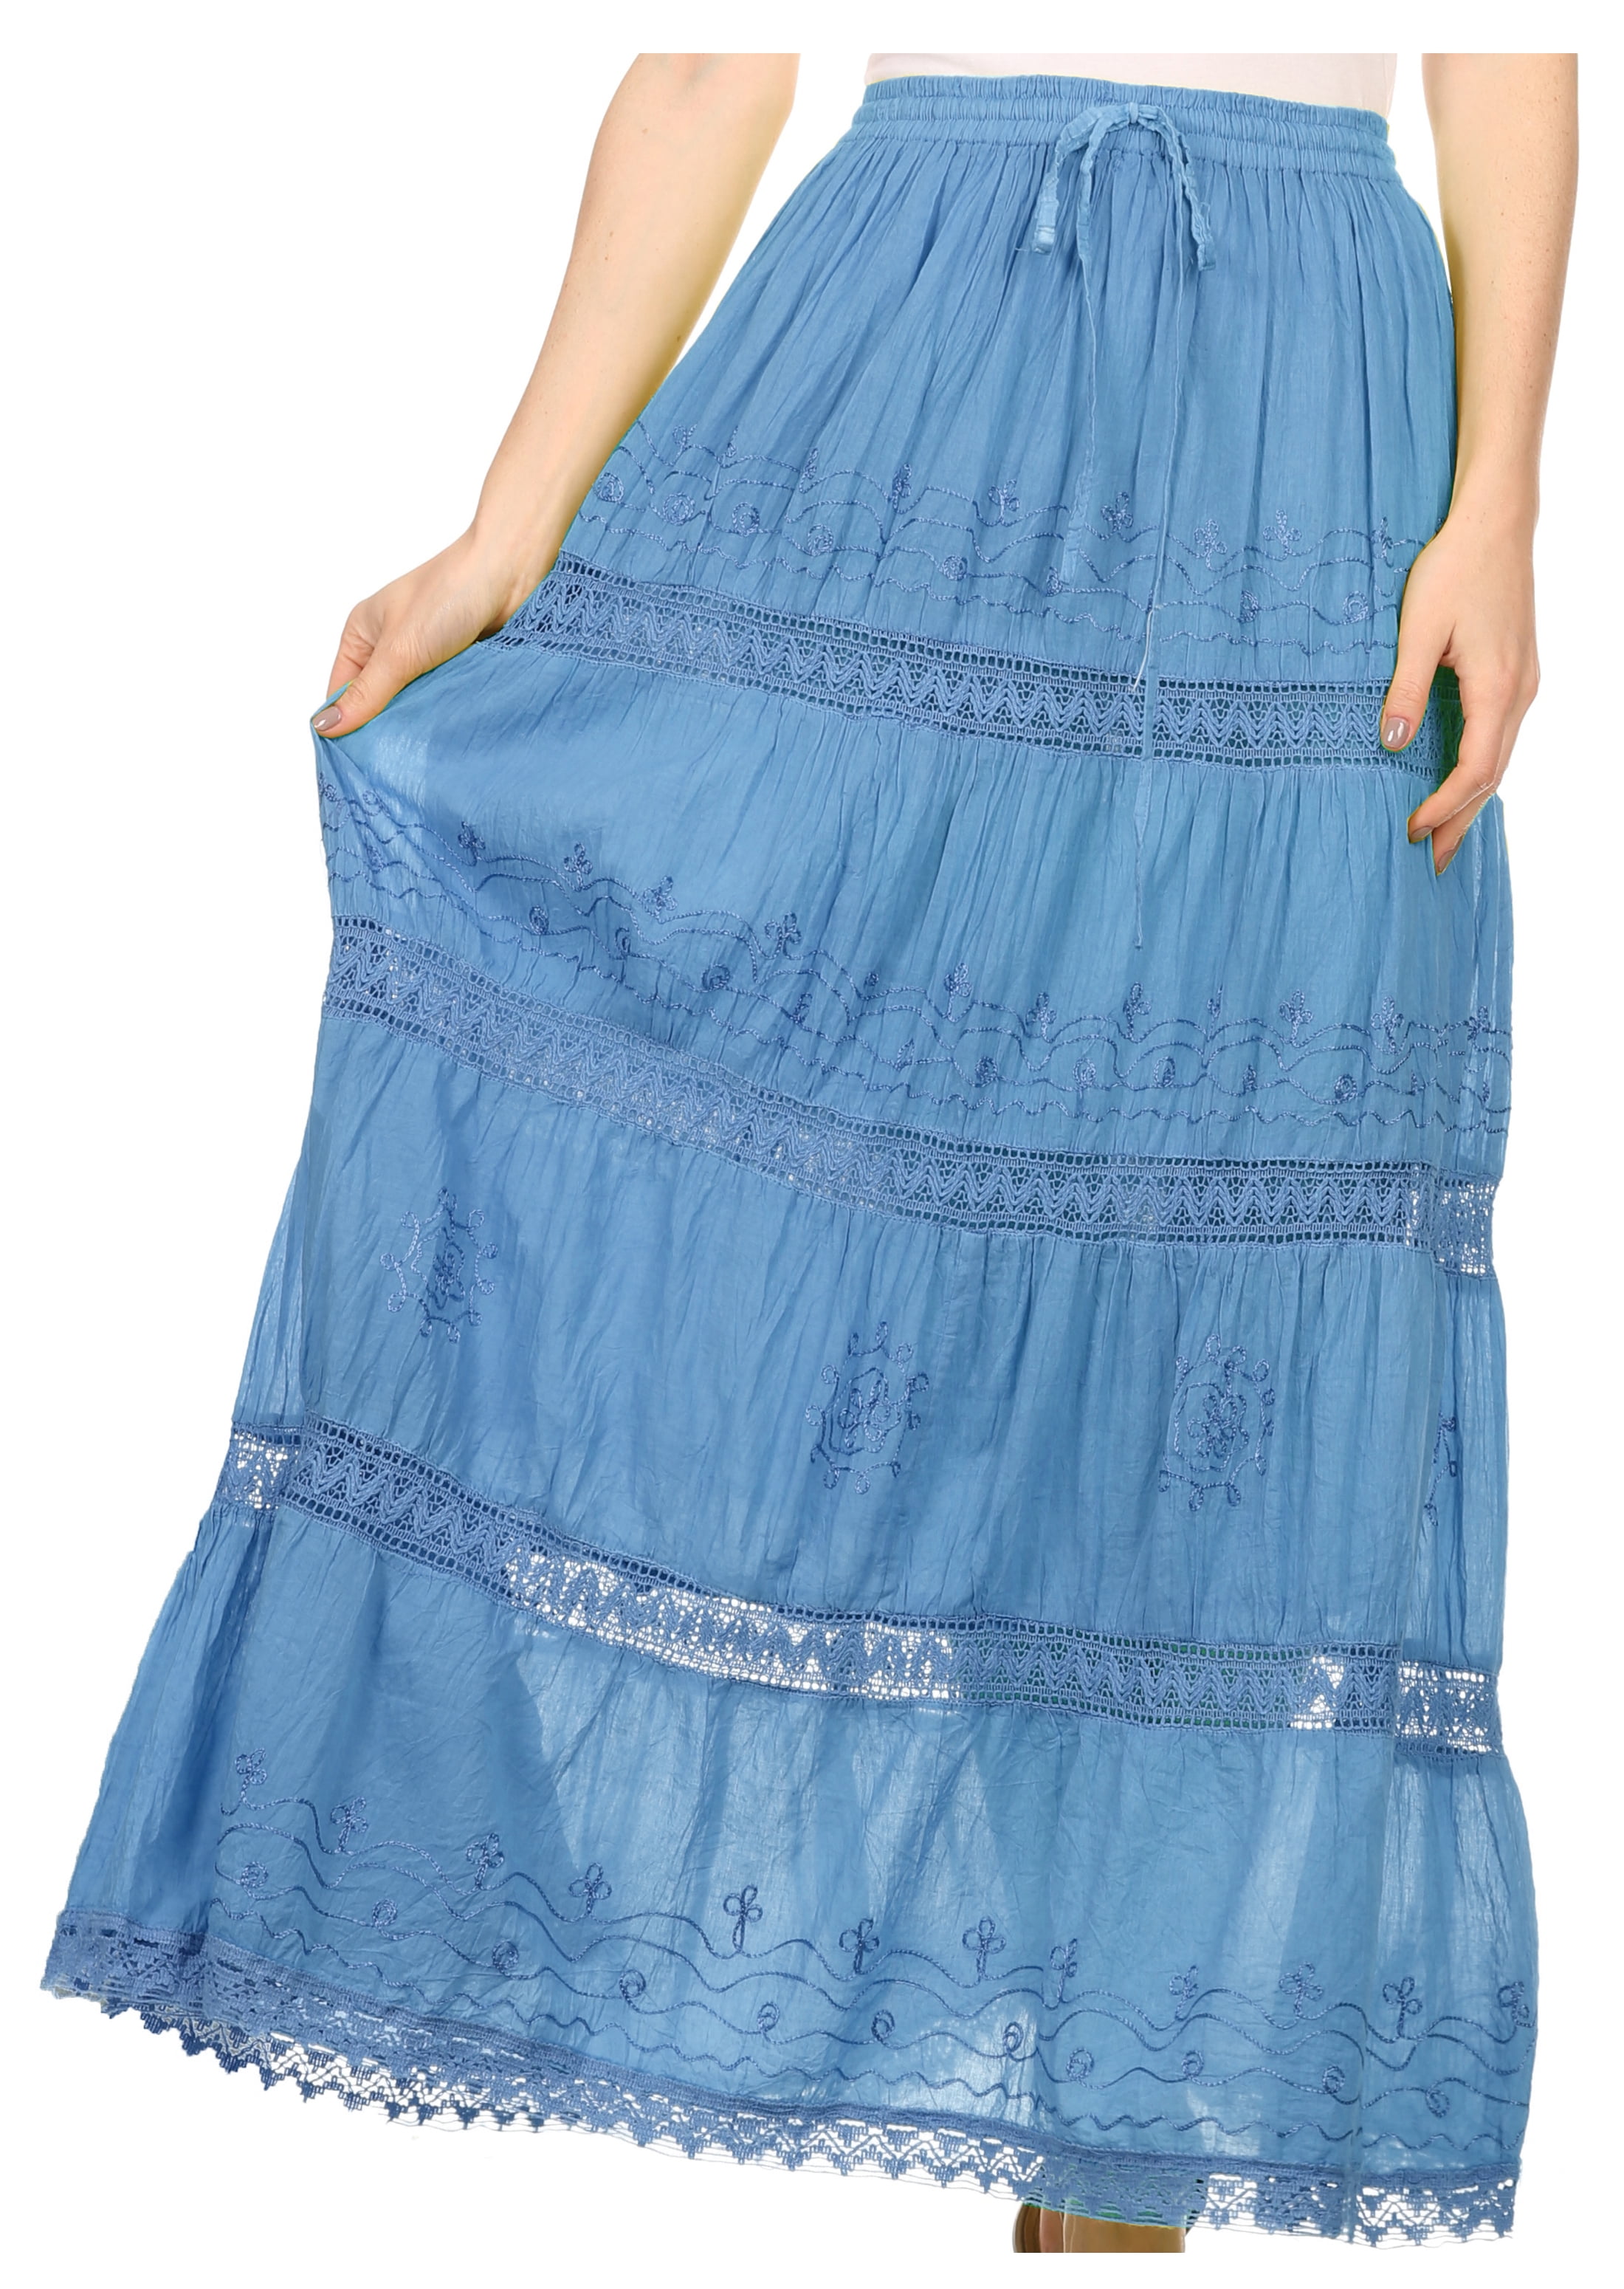 Sakkas Solid Embroidered Gypsy Bohemian Mid Length Cotton Skirt - Blue -  One Size - Walmart.com